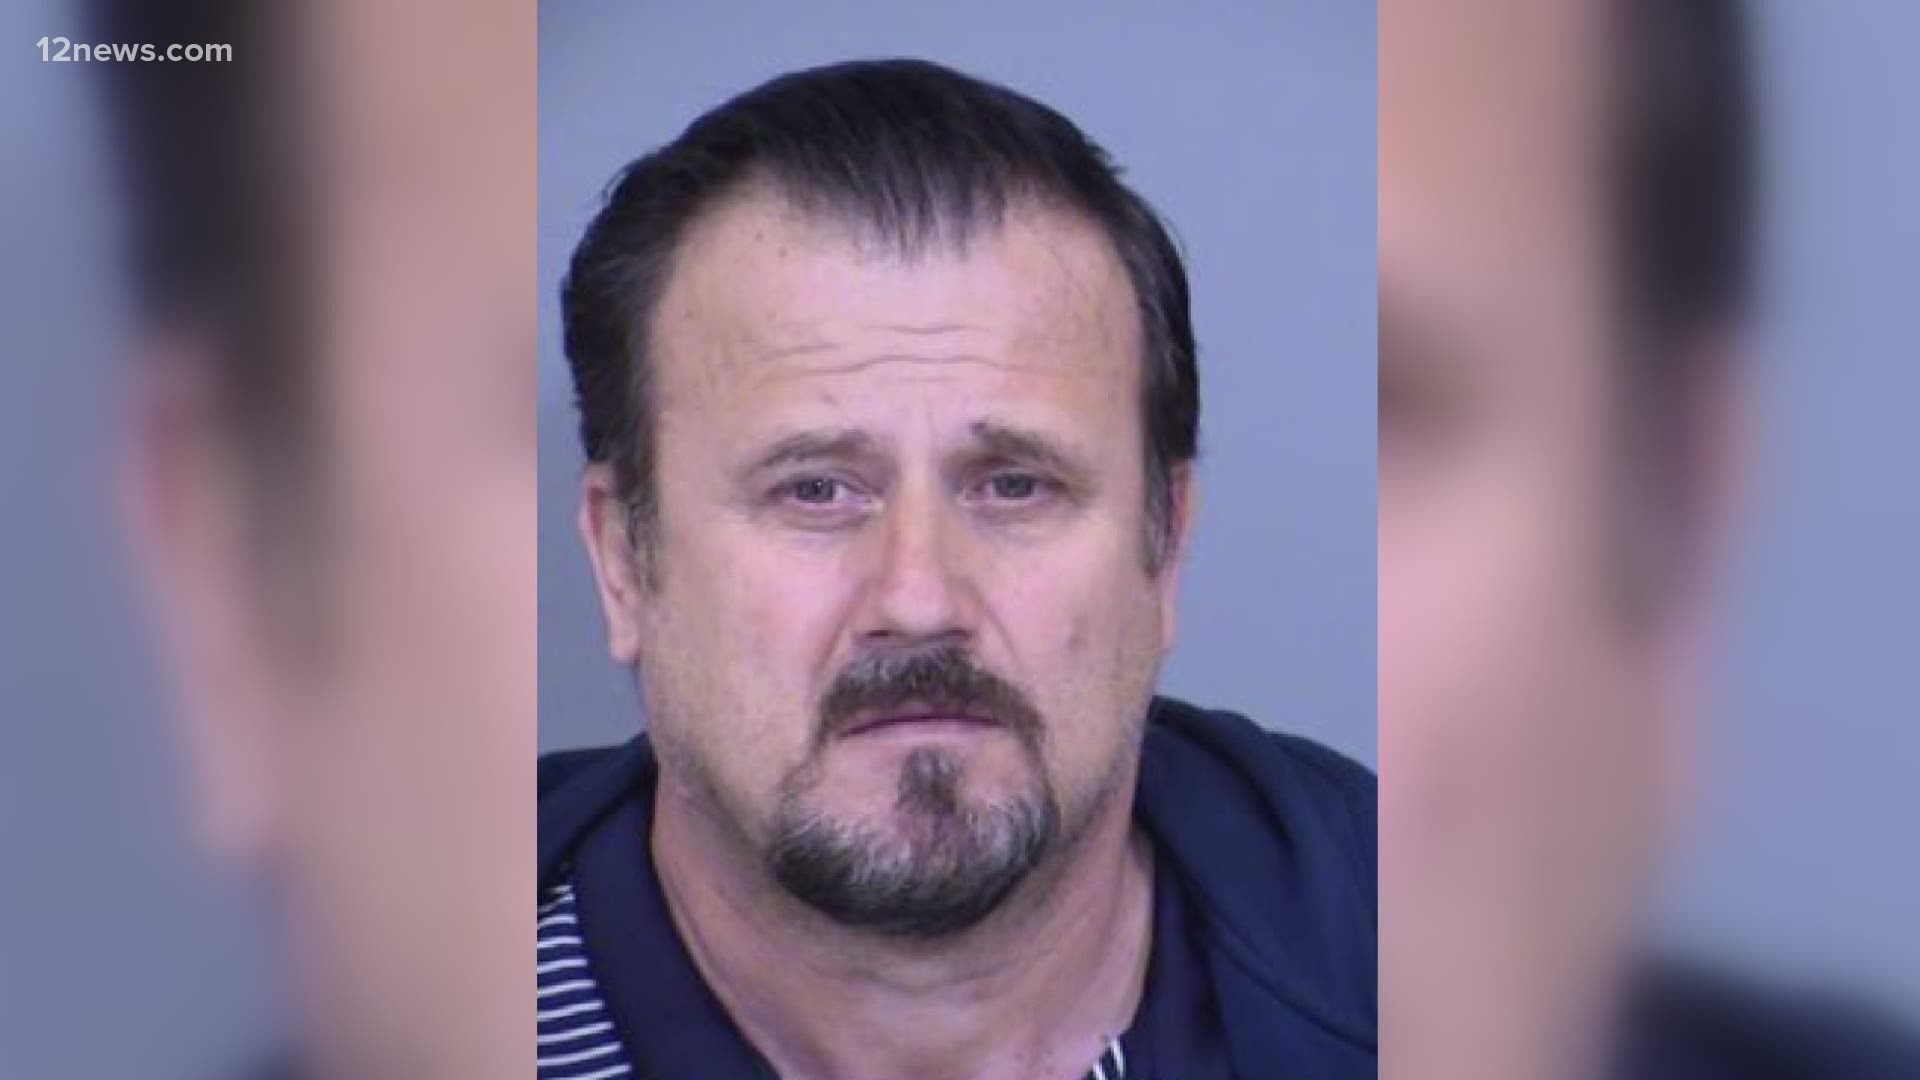 Valer Catuna, 52, is facing a second-degree murder charge after the death of a patient at the Artemis Adult Care Home near 35th and Grovers avenues on Oct. 21.